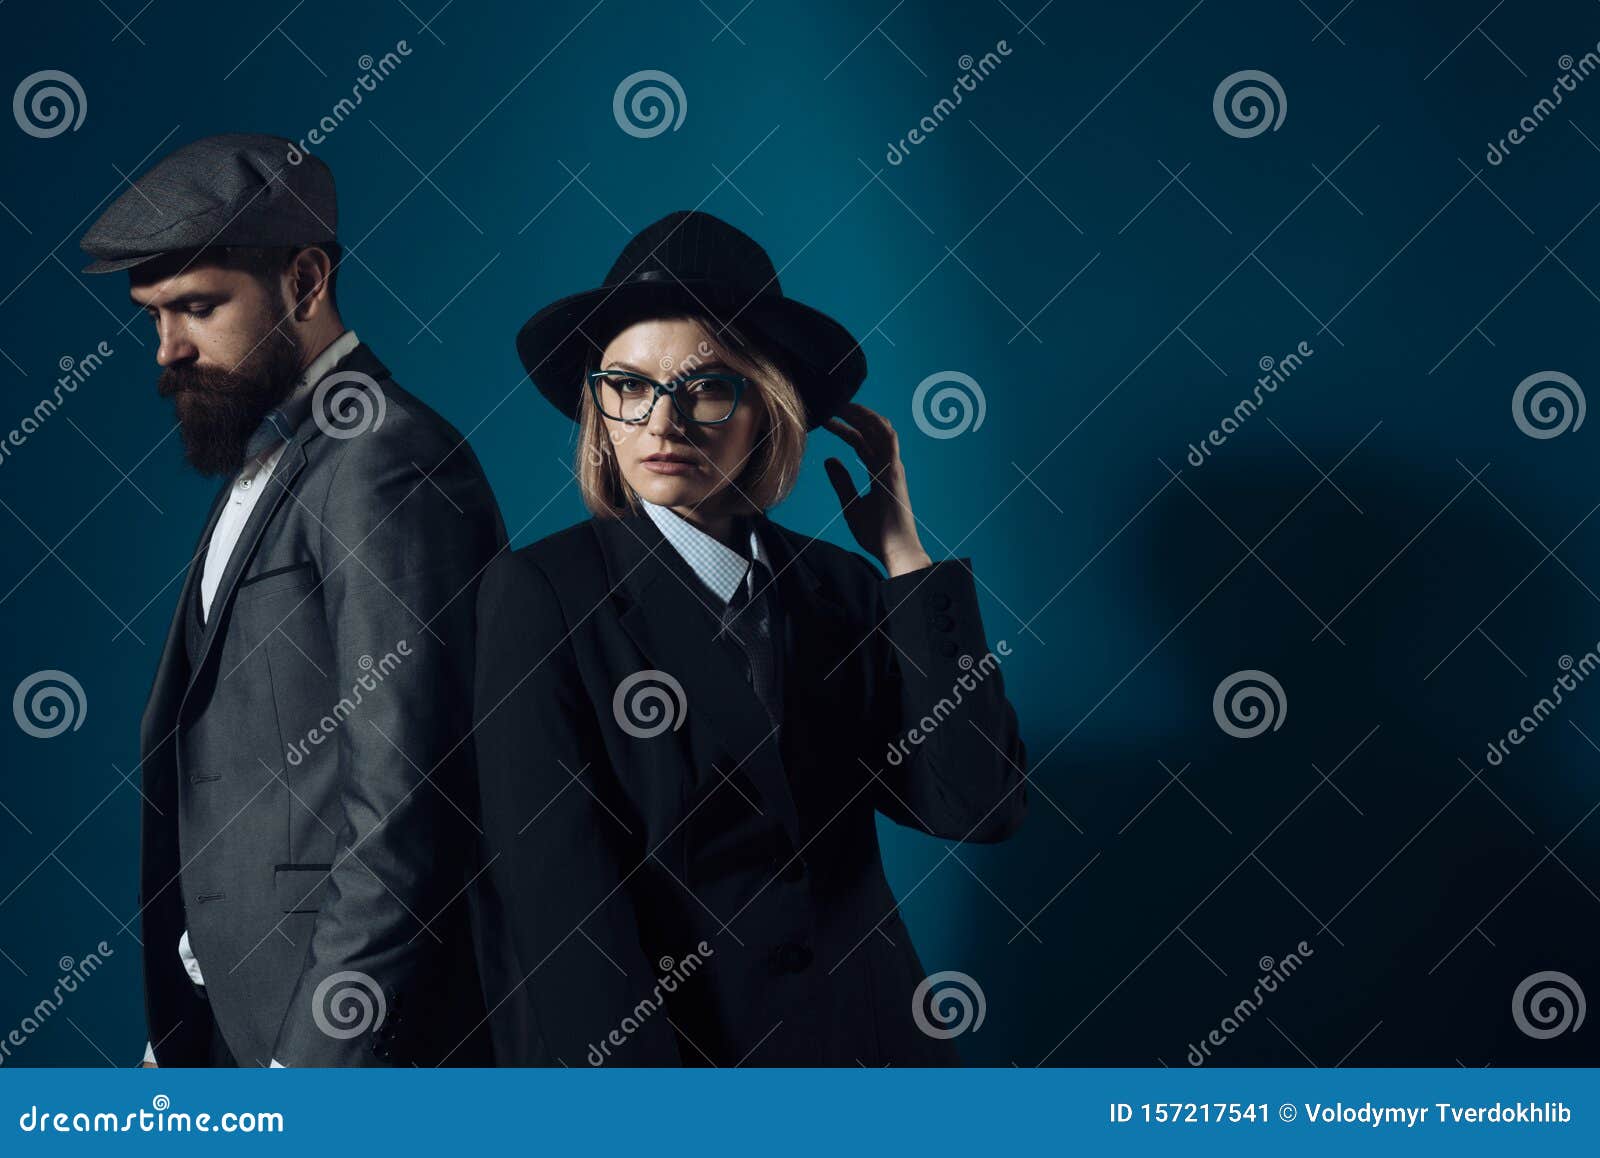 man and woman in oldfashioned suit and hat